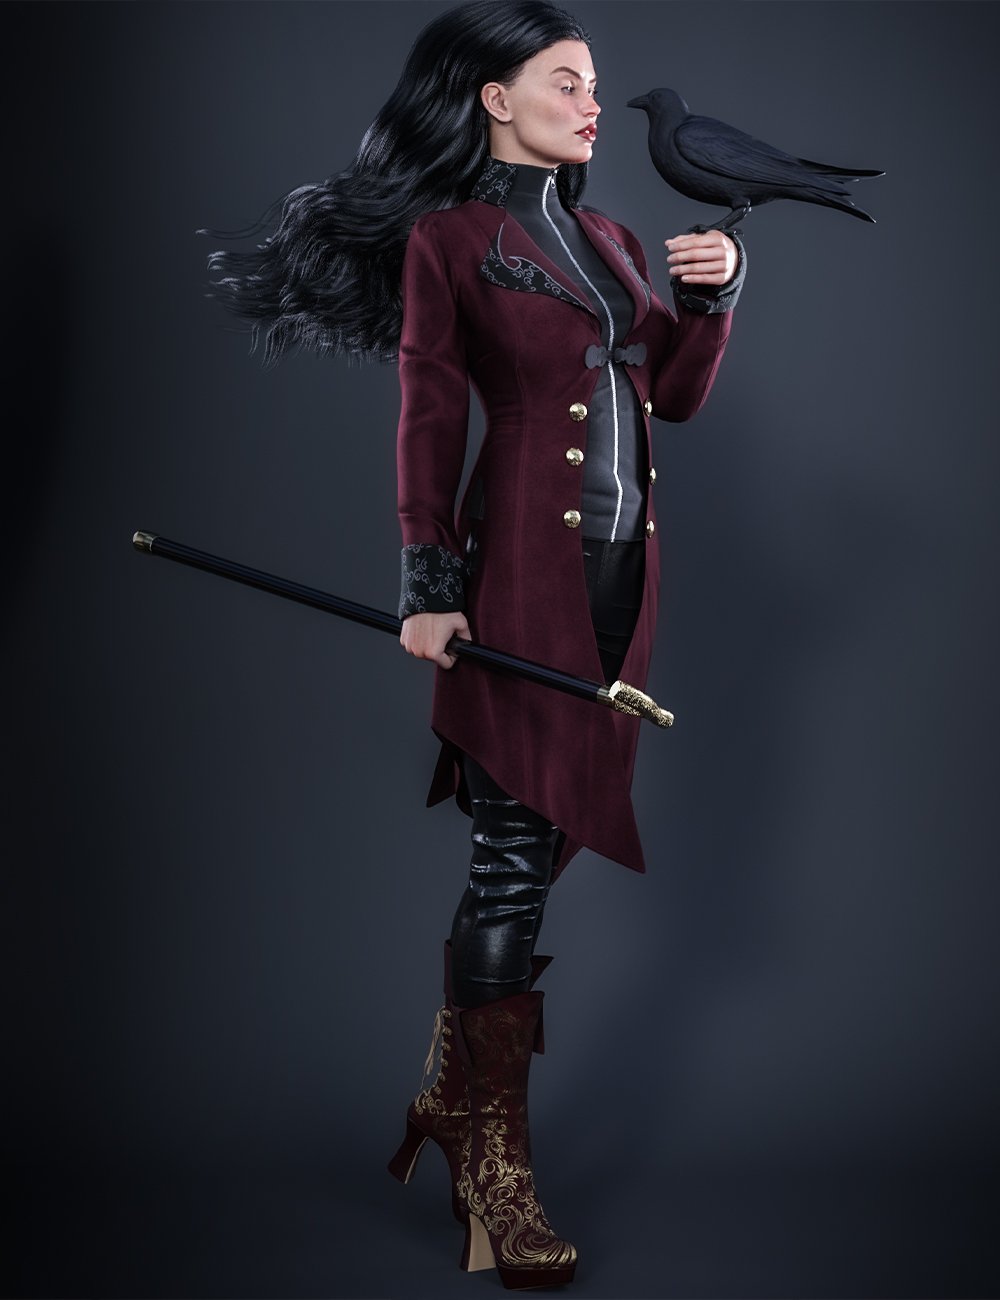 dForce Victorian Vampire Outfit for Genesis 8 and 8.1 Females